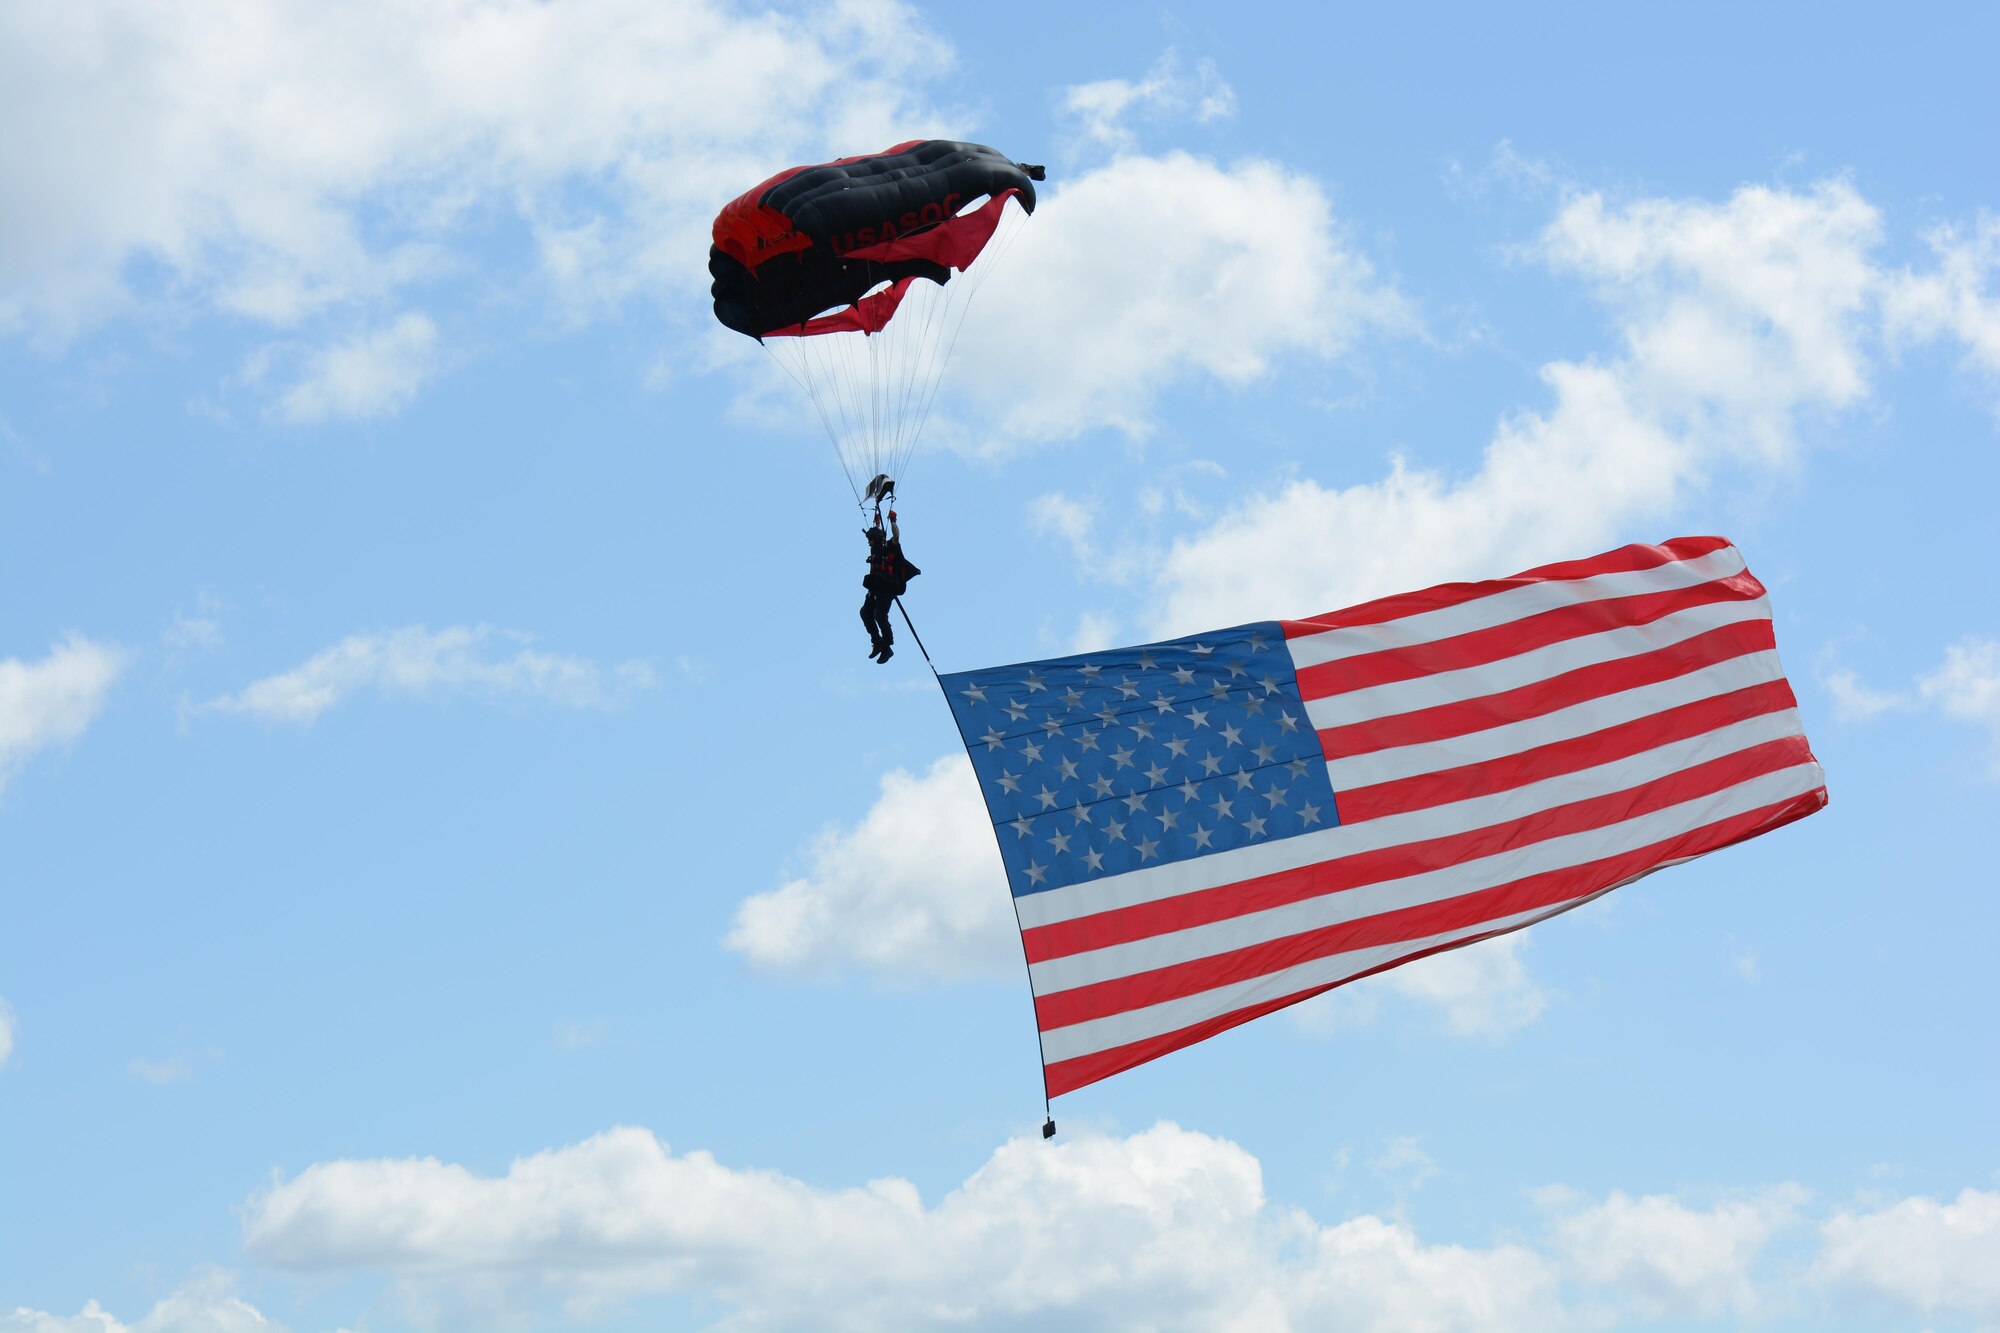 A member of the Black Daggers U.S. Army Special Operations Command parachute demo team displays the American flag on his descent August 13, 2017, at the 2017 Westfield International Air Show at Barnes Air National Guard  Base in Westfield, Mass.